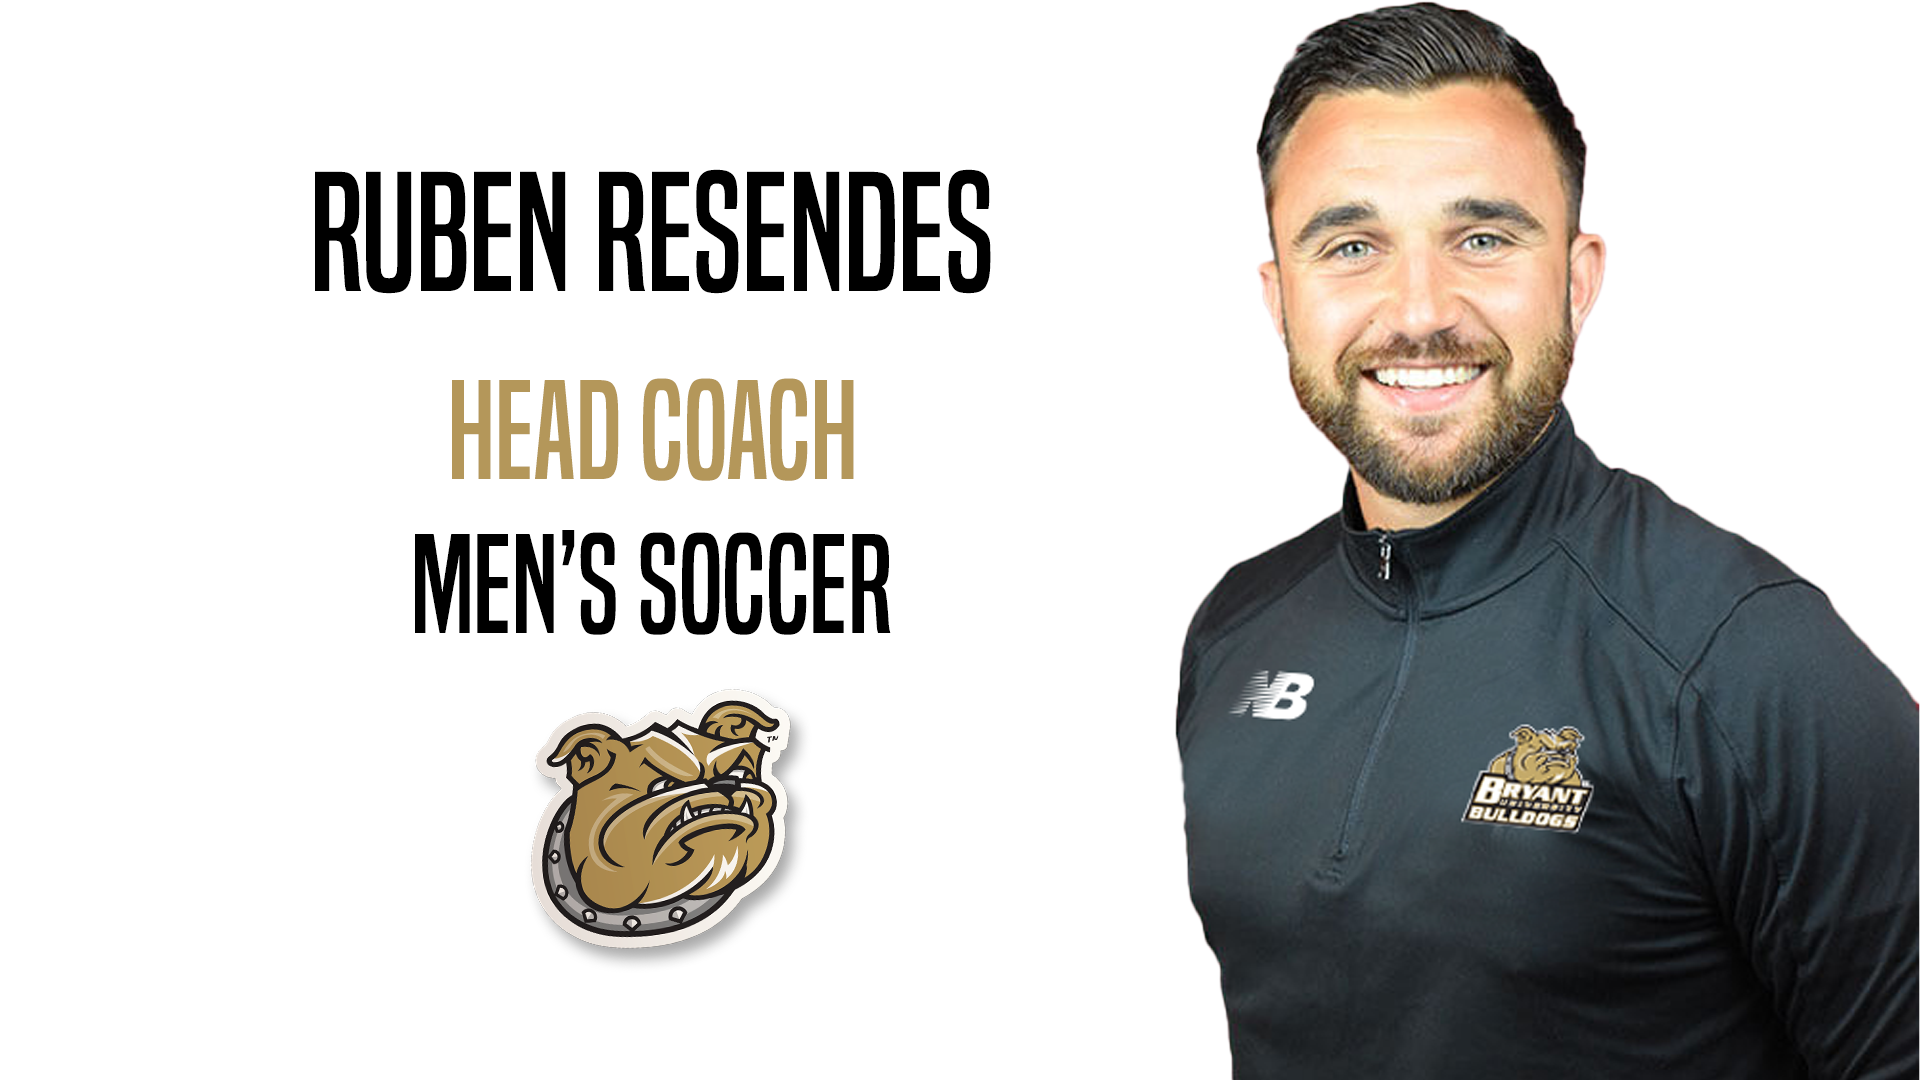 Ruben Resendes named head soccer coach at Bryant University